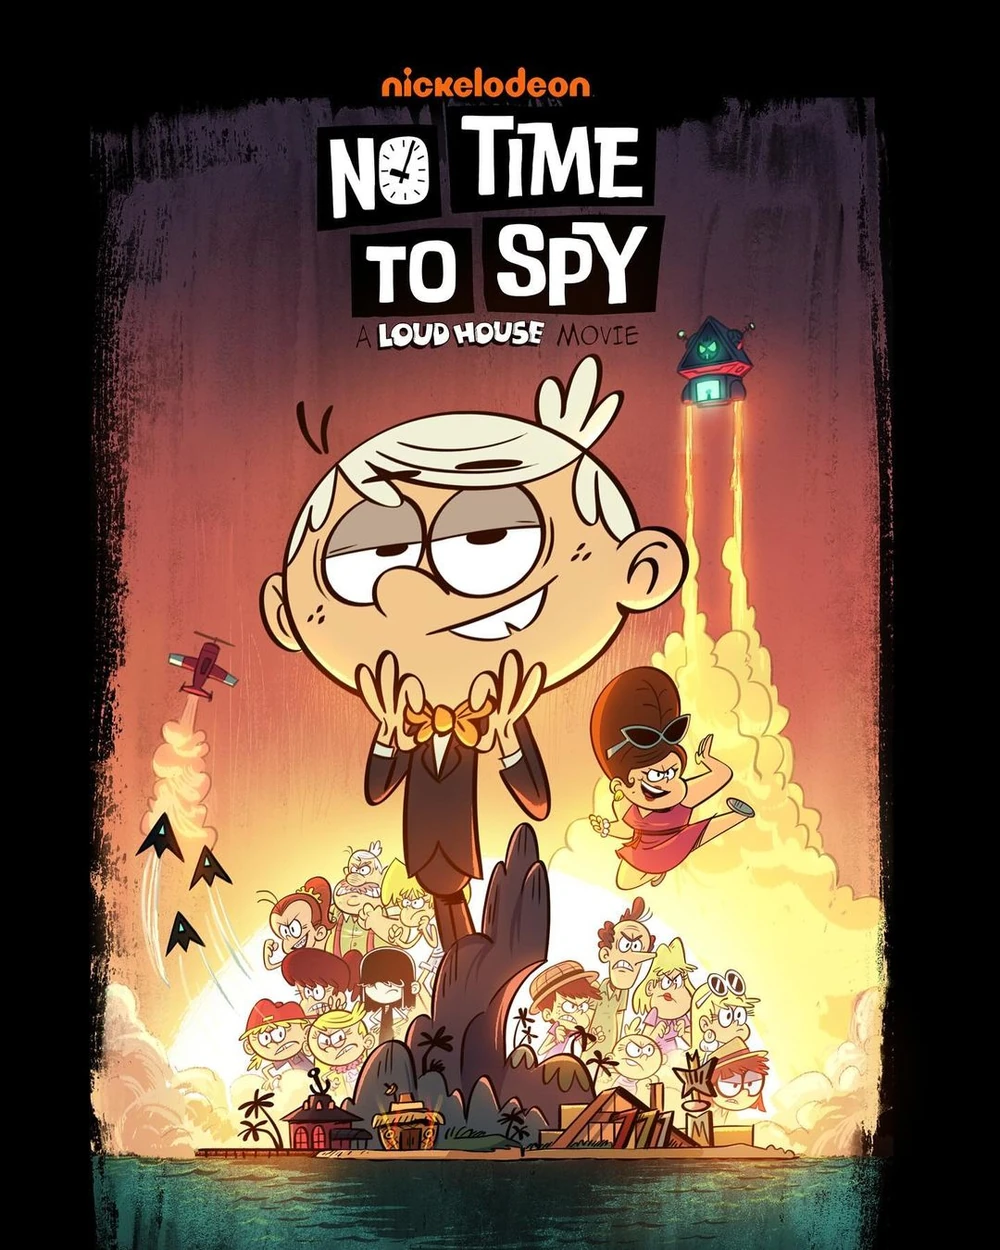 On a scale of 0-10, how excited are you for No Time to Spy? | Fandom